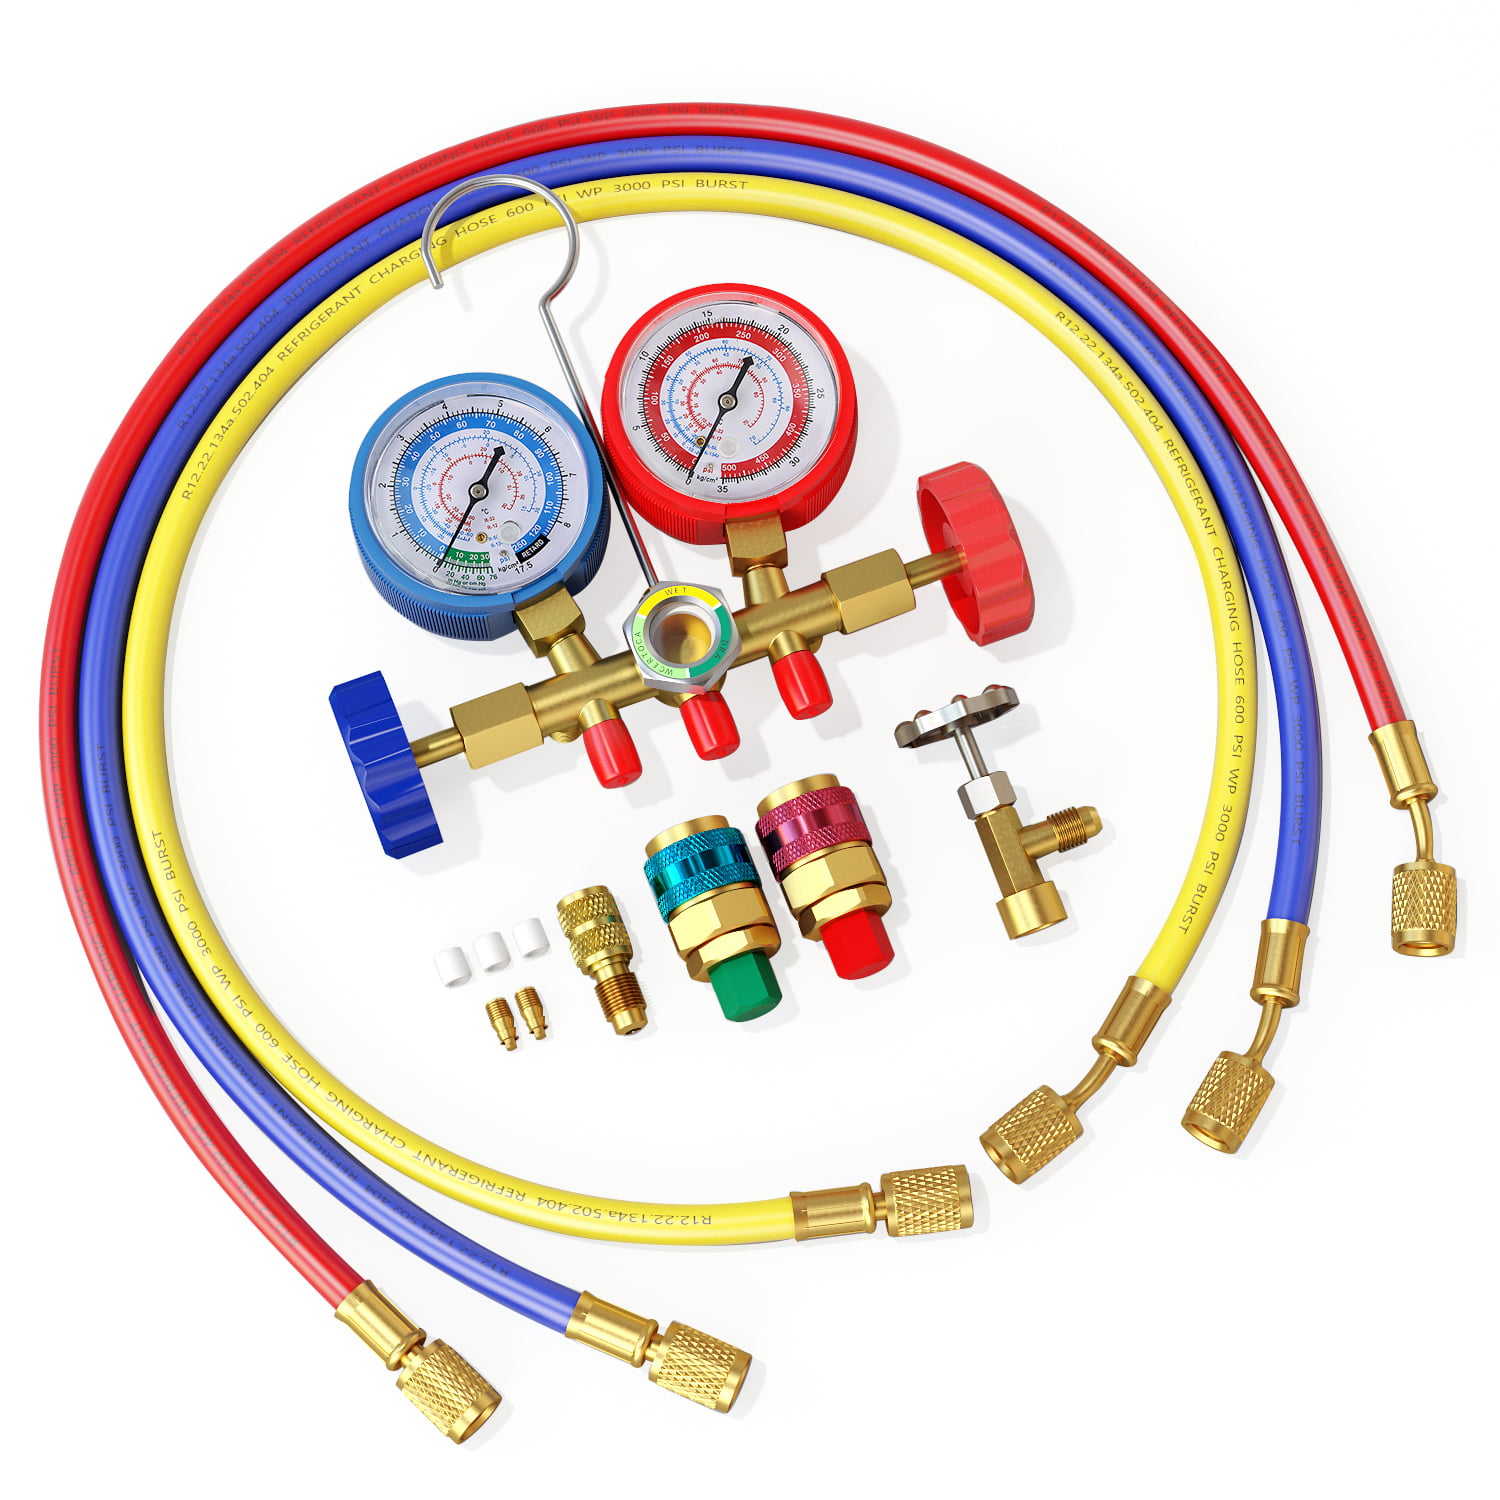 2 Way AC Diagnostic Manifold Gauge Set Precision Measure Pressure in Refrigeration Equipment for R134a r134 R410A R404A R22 w/Hoses Coupler Adapters Multicolor, 1X Refrigerant Meter Tool kit 